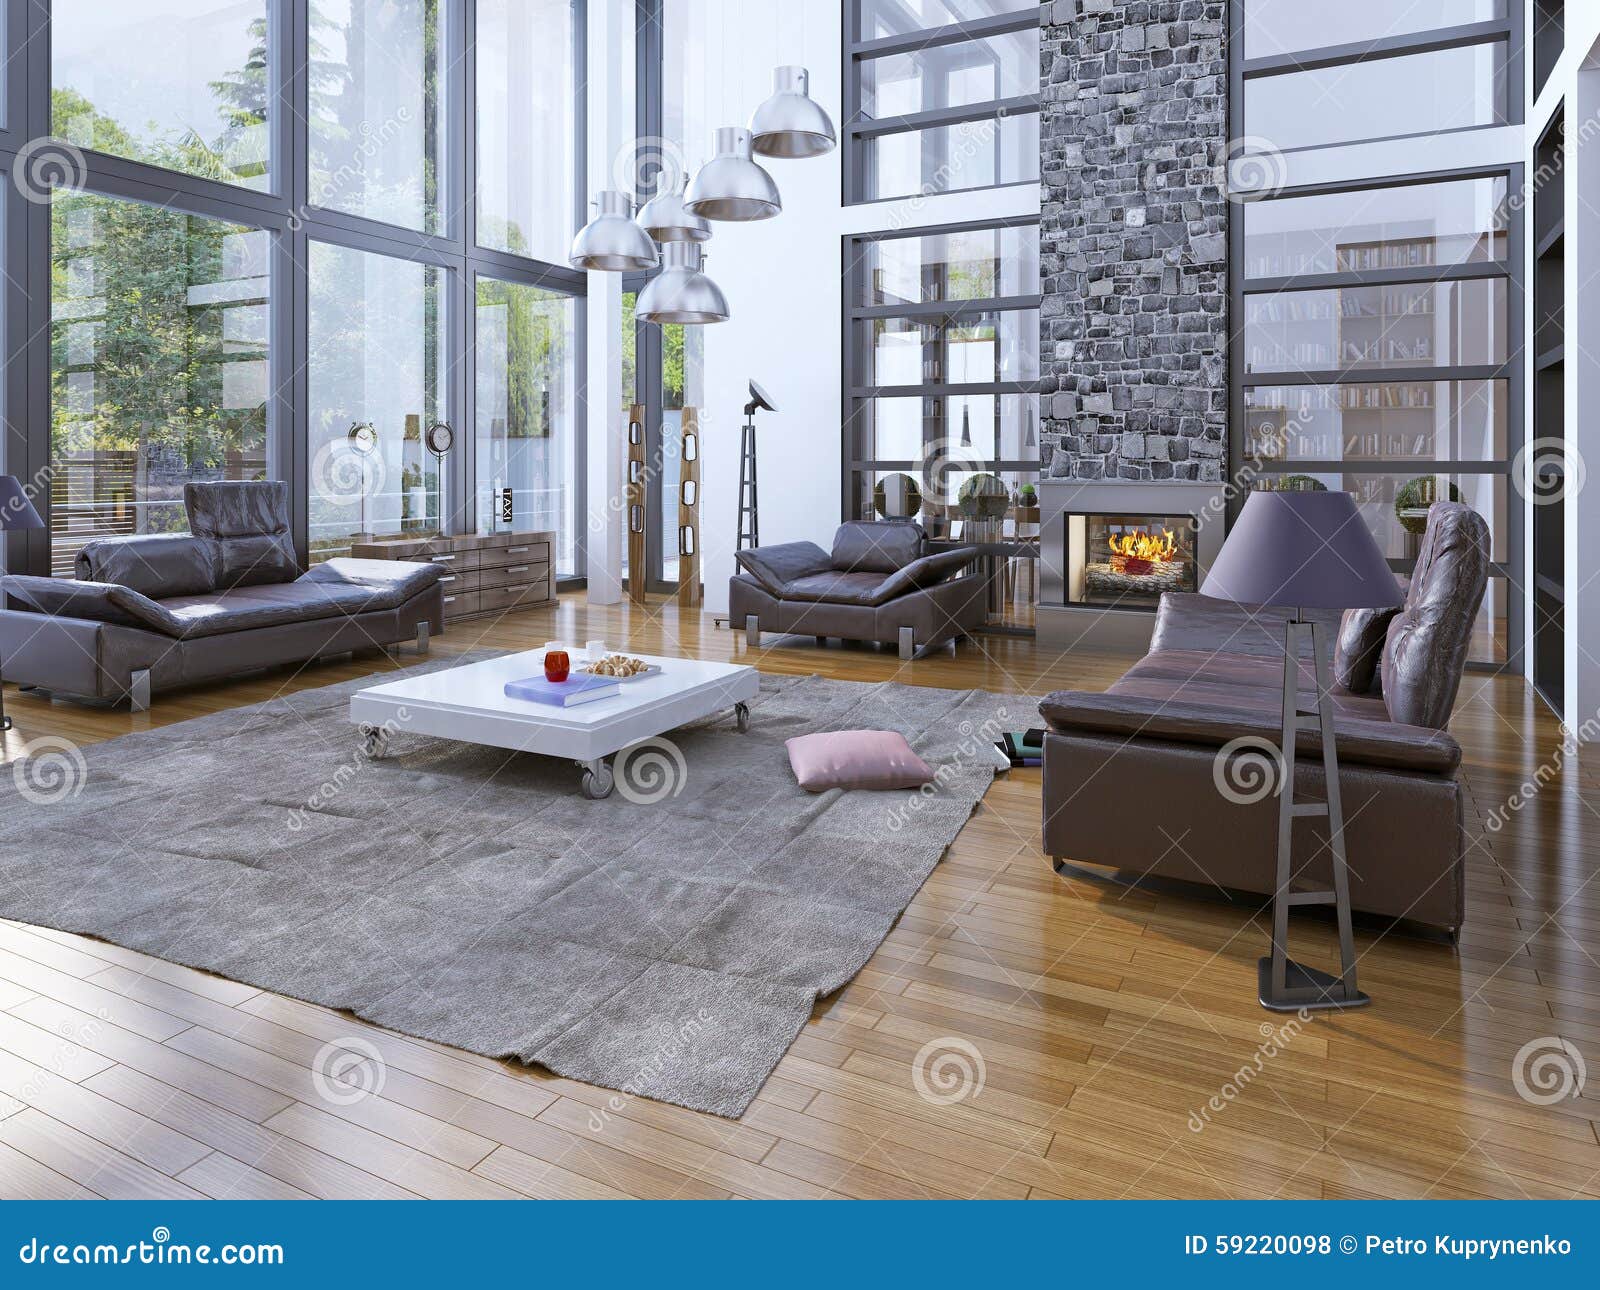 High Ceilings Living Room With Fireplace Stock Photo Image Of